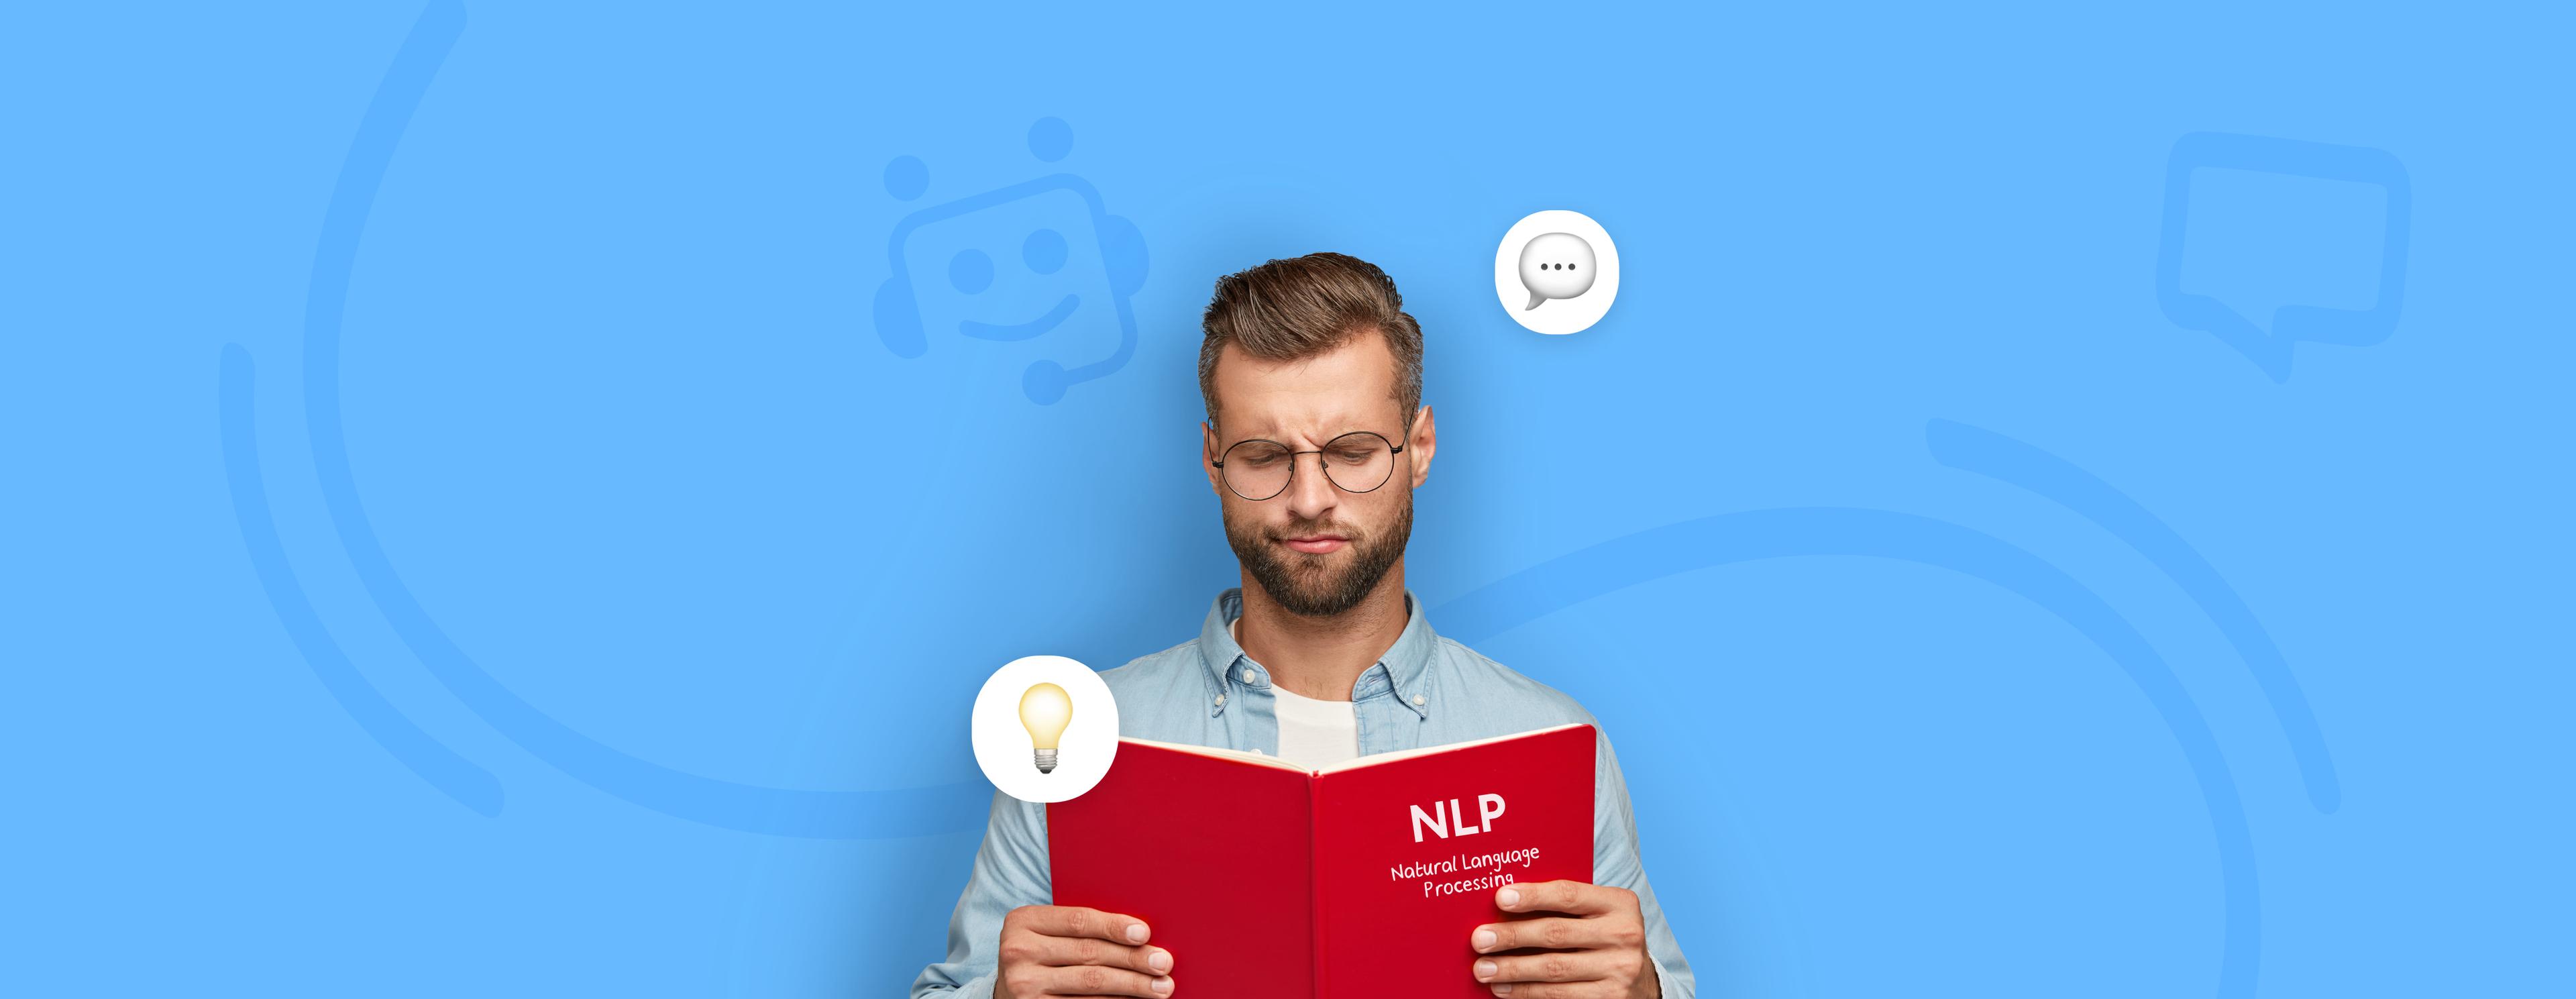 nlp chatbot cover image